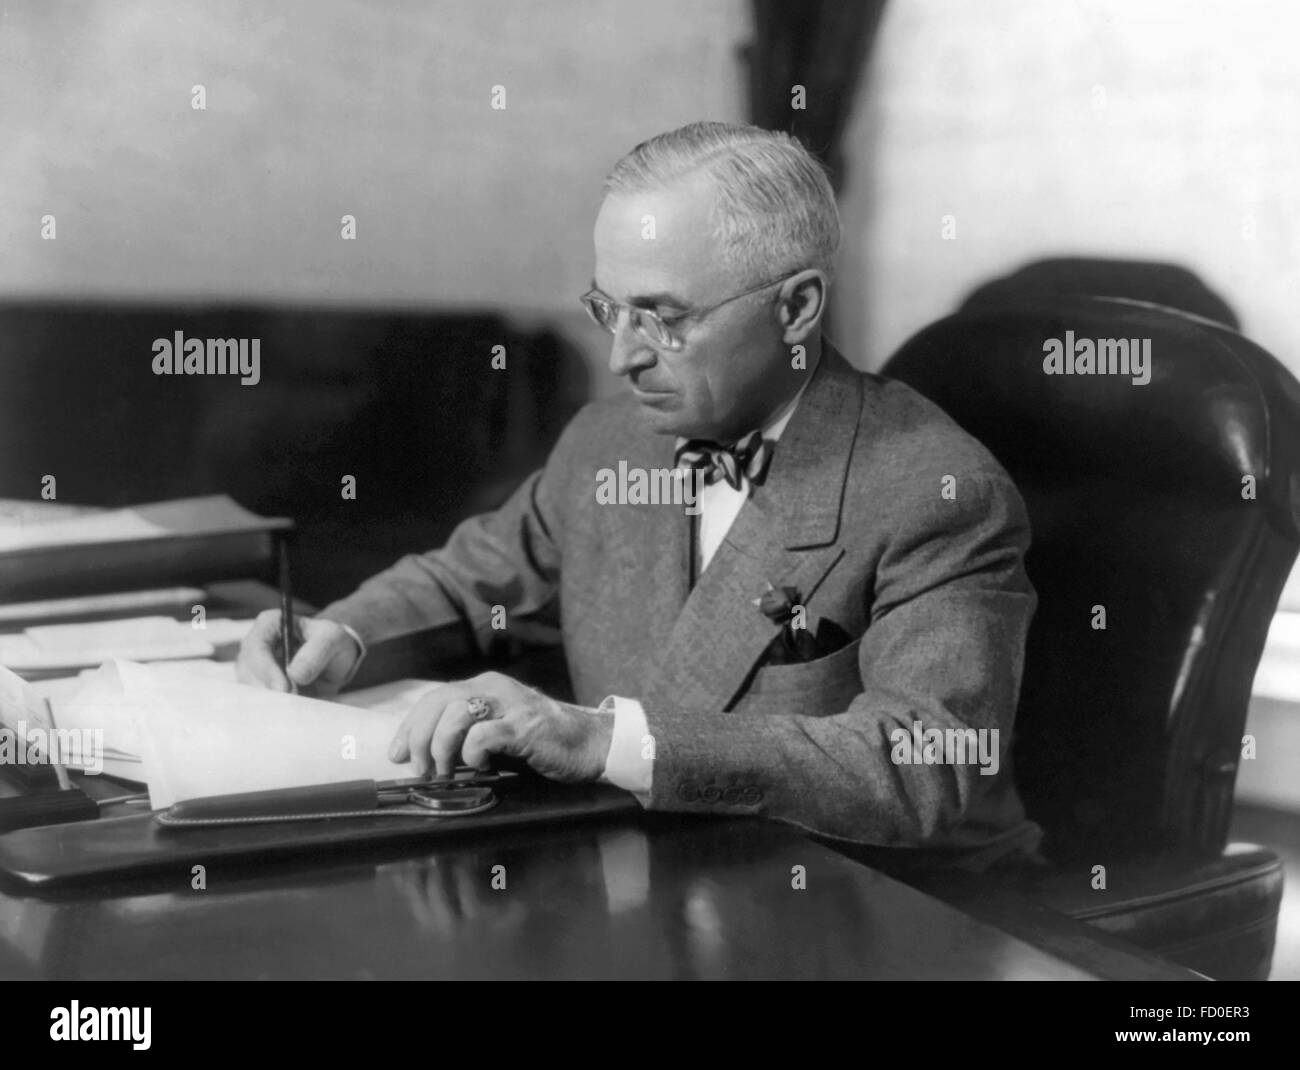 Harry S Truman, portrait of the 33rd President of the USA, c.1945 Stock Photo